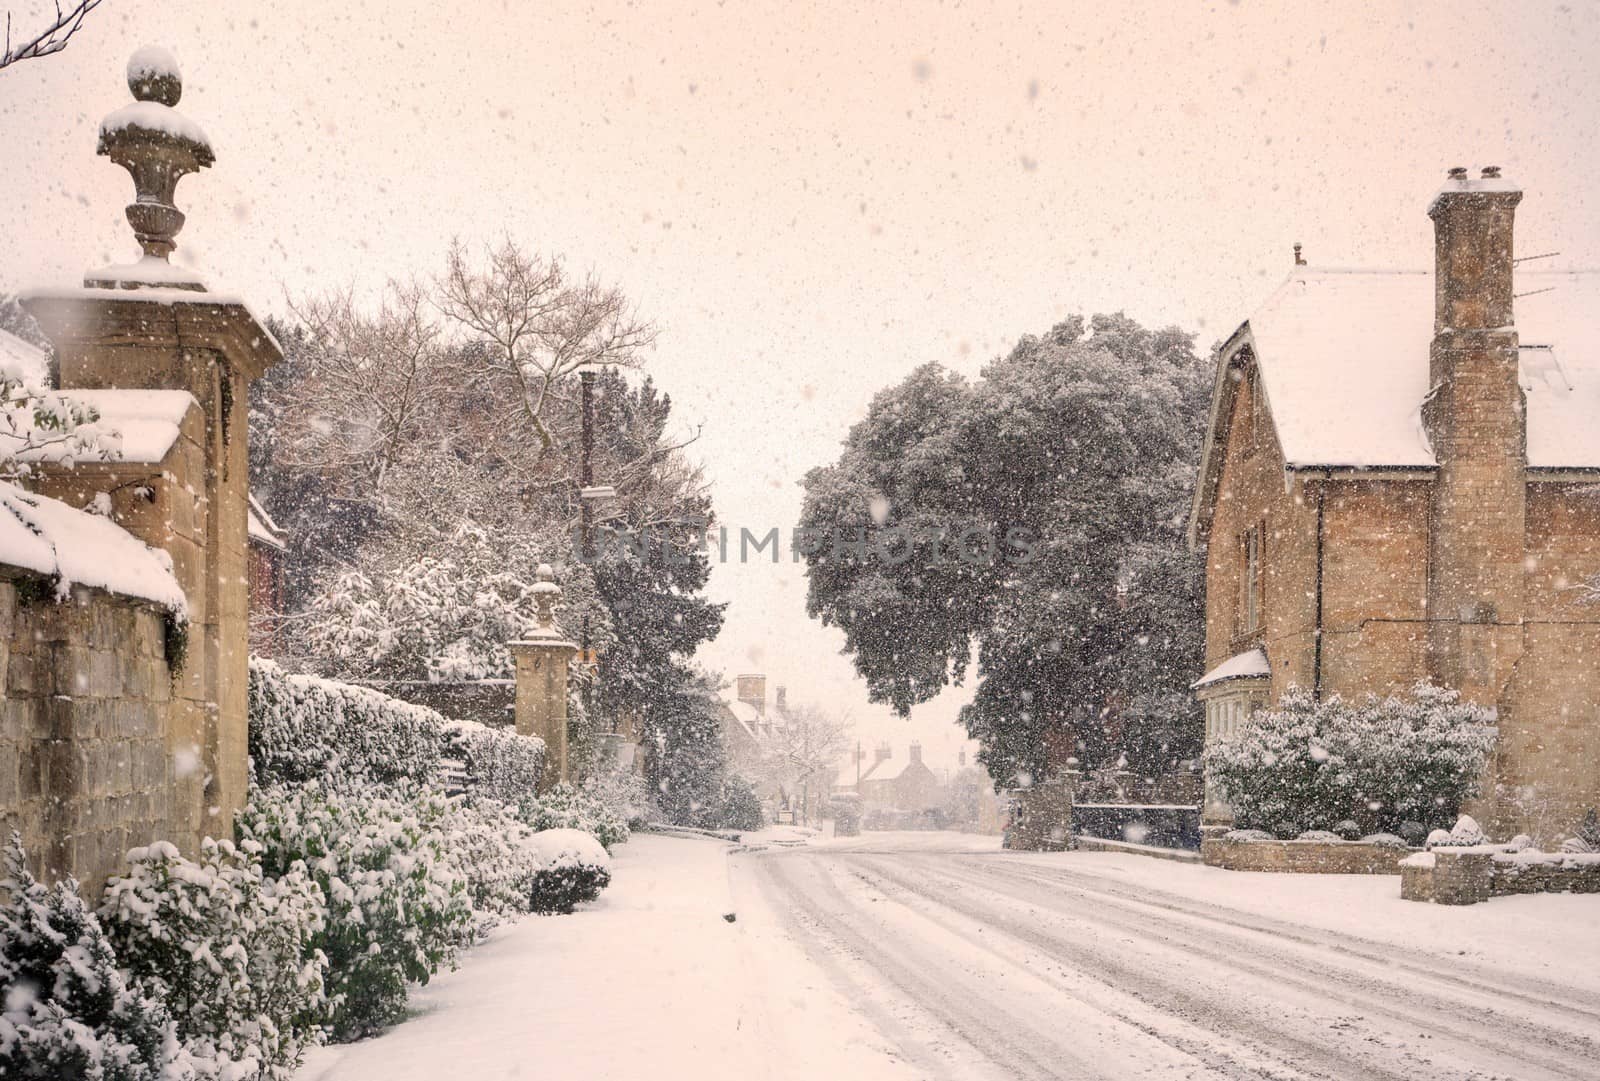 Cotswold high street in wintertime, Mickleton, Chipping Campden, Gloucestershire, England.